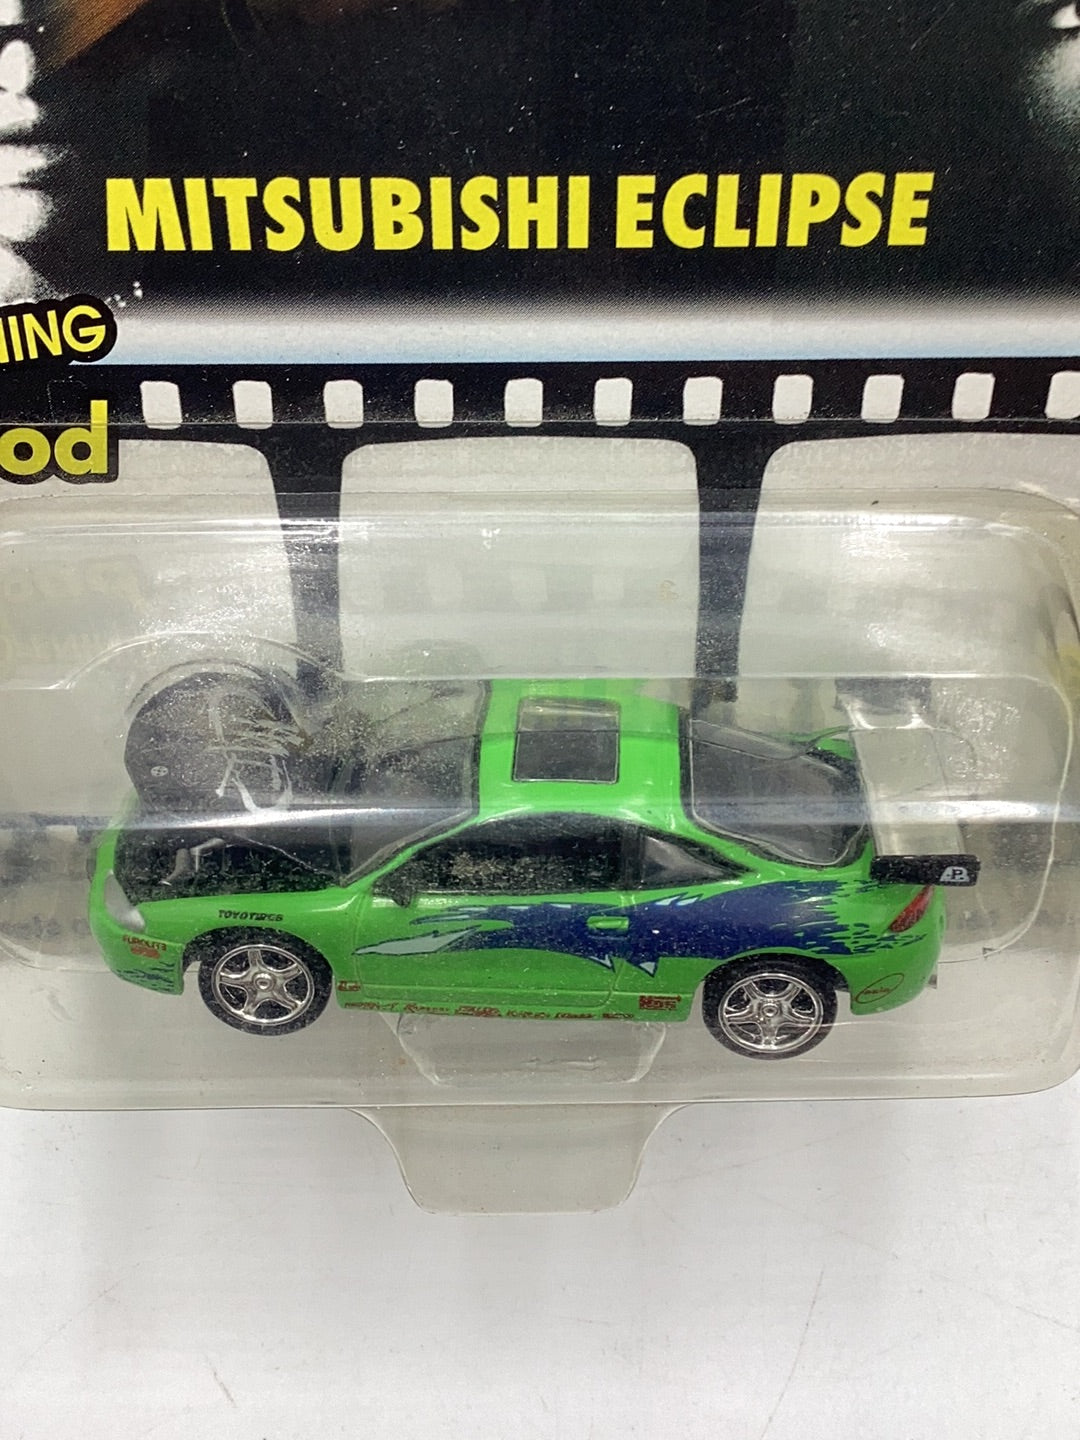 2002 Revell The Fast and the Furious Mitsubishi Eclipse #100 VHTF